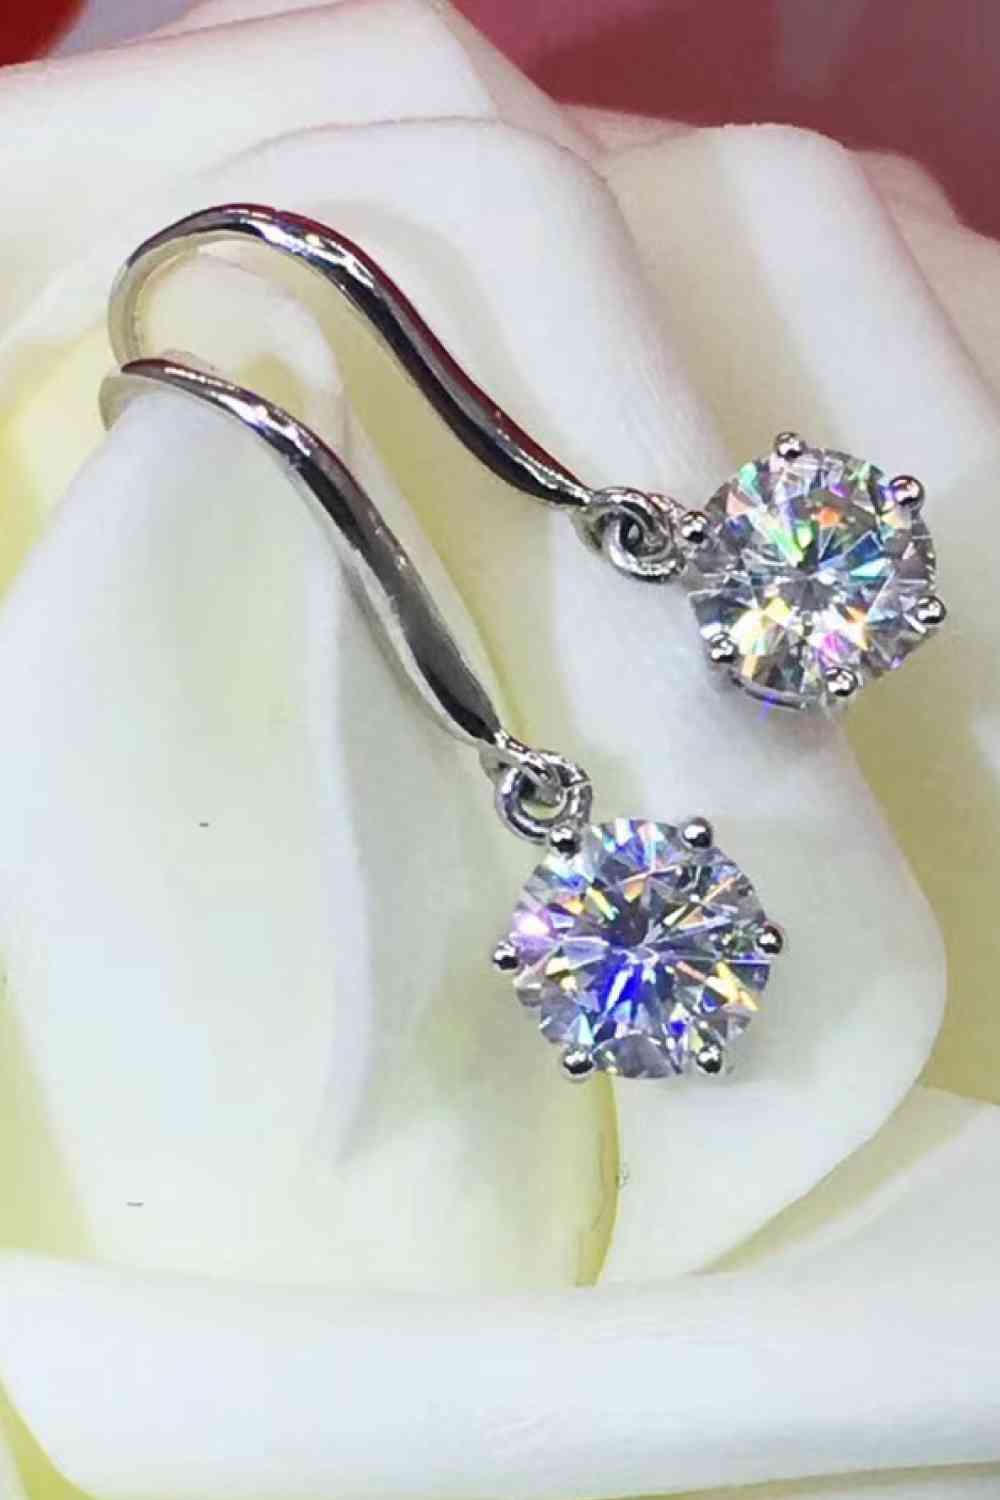 a pair of diamond earrings sitting on top of a white rose